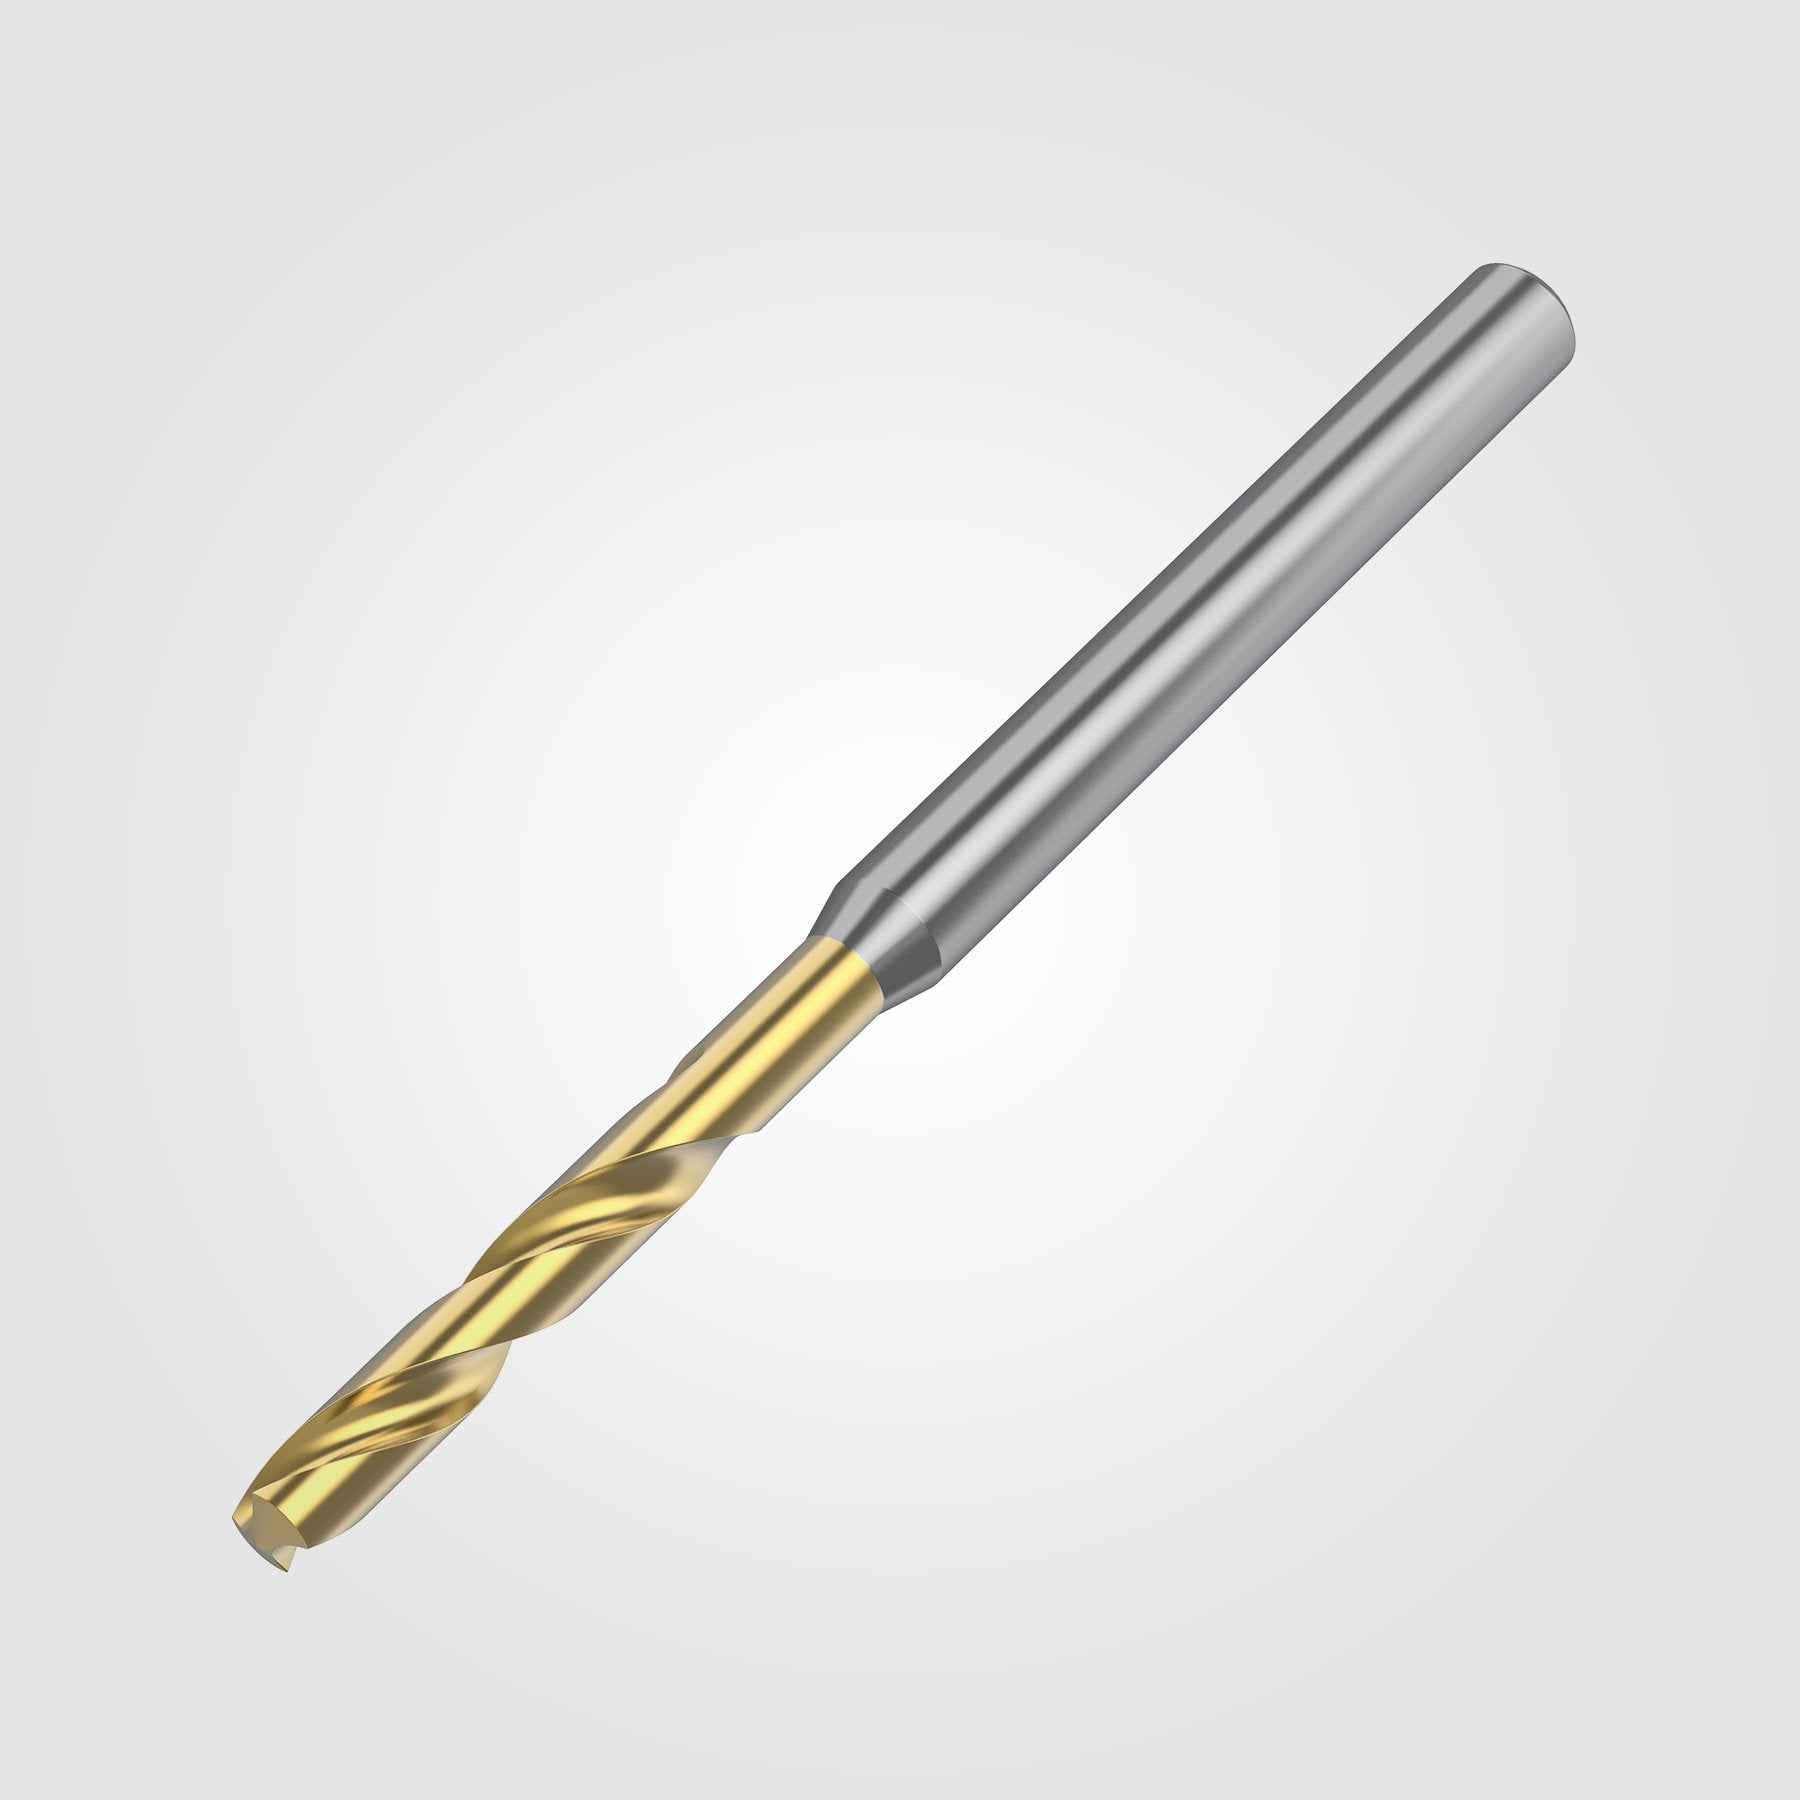 GOdrill (THROUGH COOLANT) | 17.463mm / .6875" / 5xD | SOLID CARBIDE DRILL | 4149380